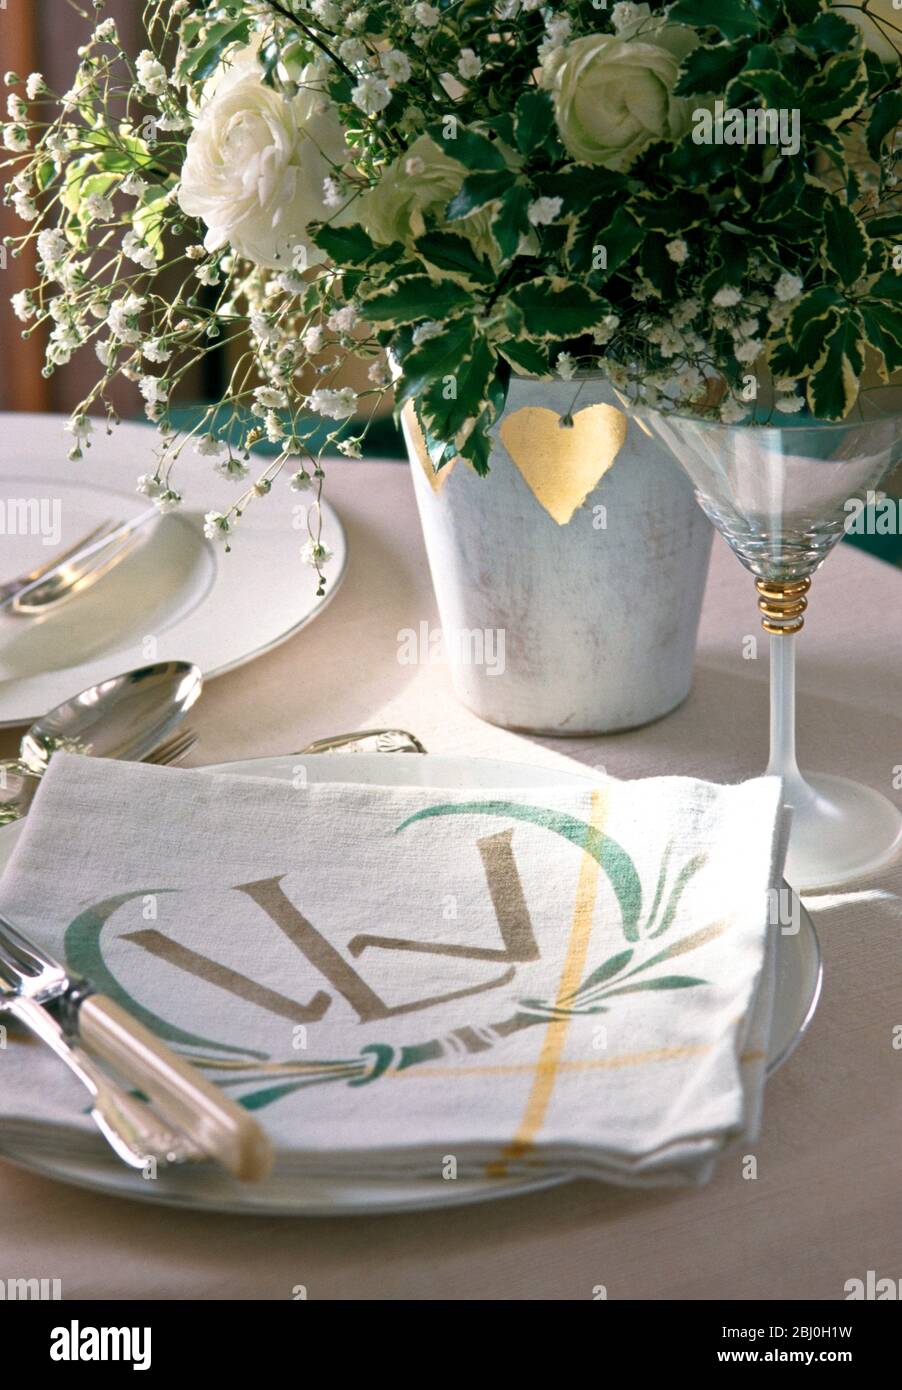 Specially stencilled napkins as part of table setting for wedding reception - Stock Photo